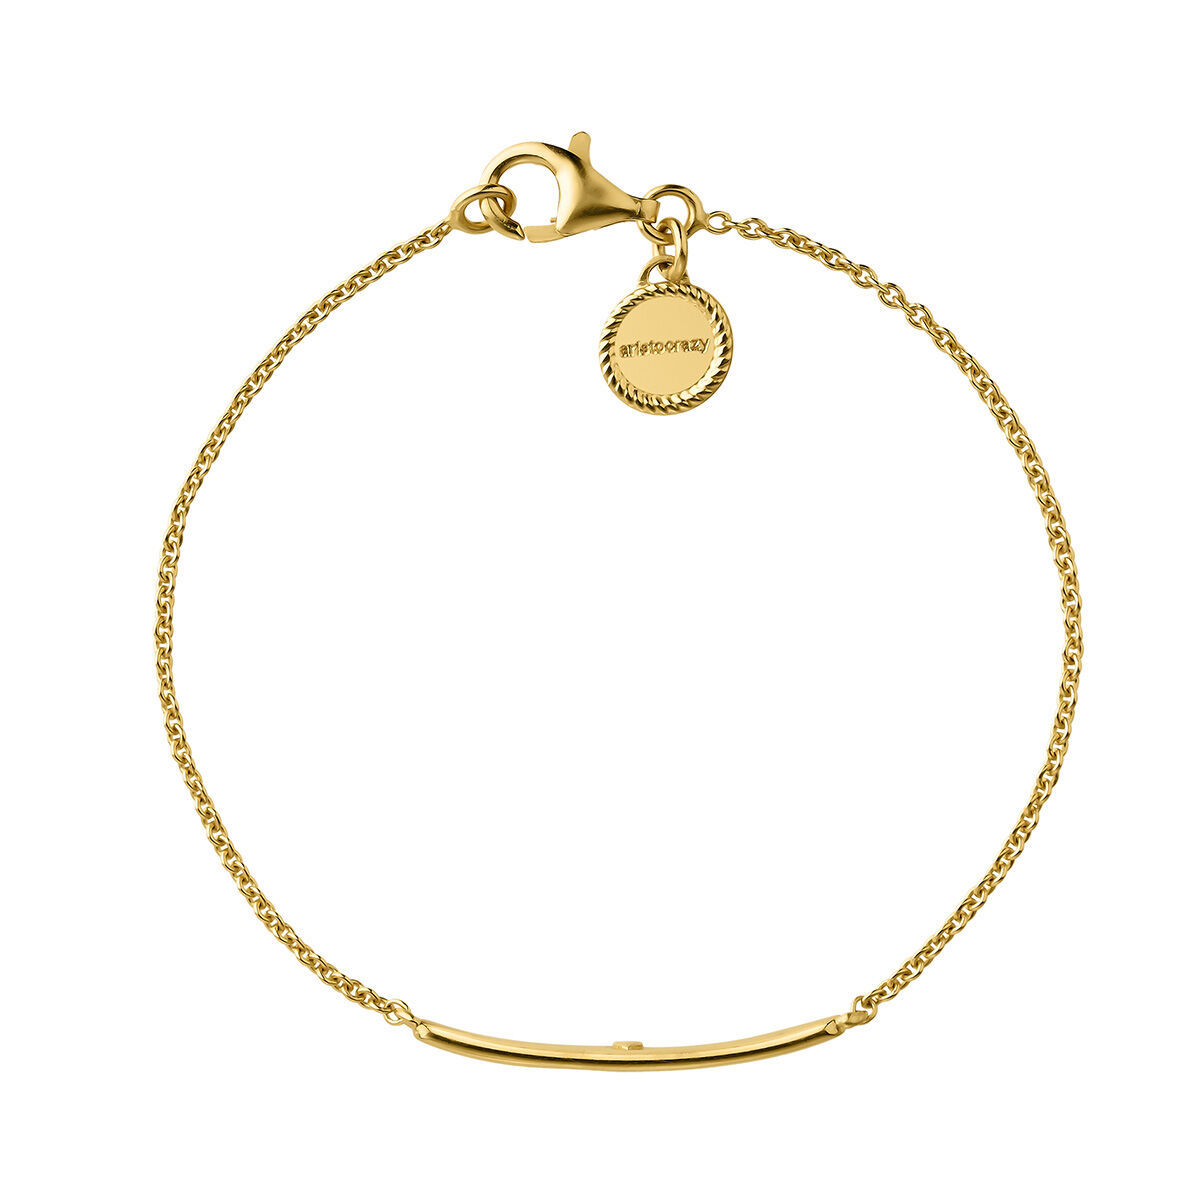 Bracelet in 18k yellow gold-plated silver with heart on the inside , J05164-02, hi-res